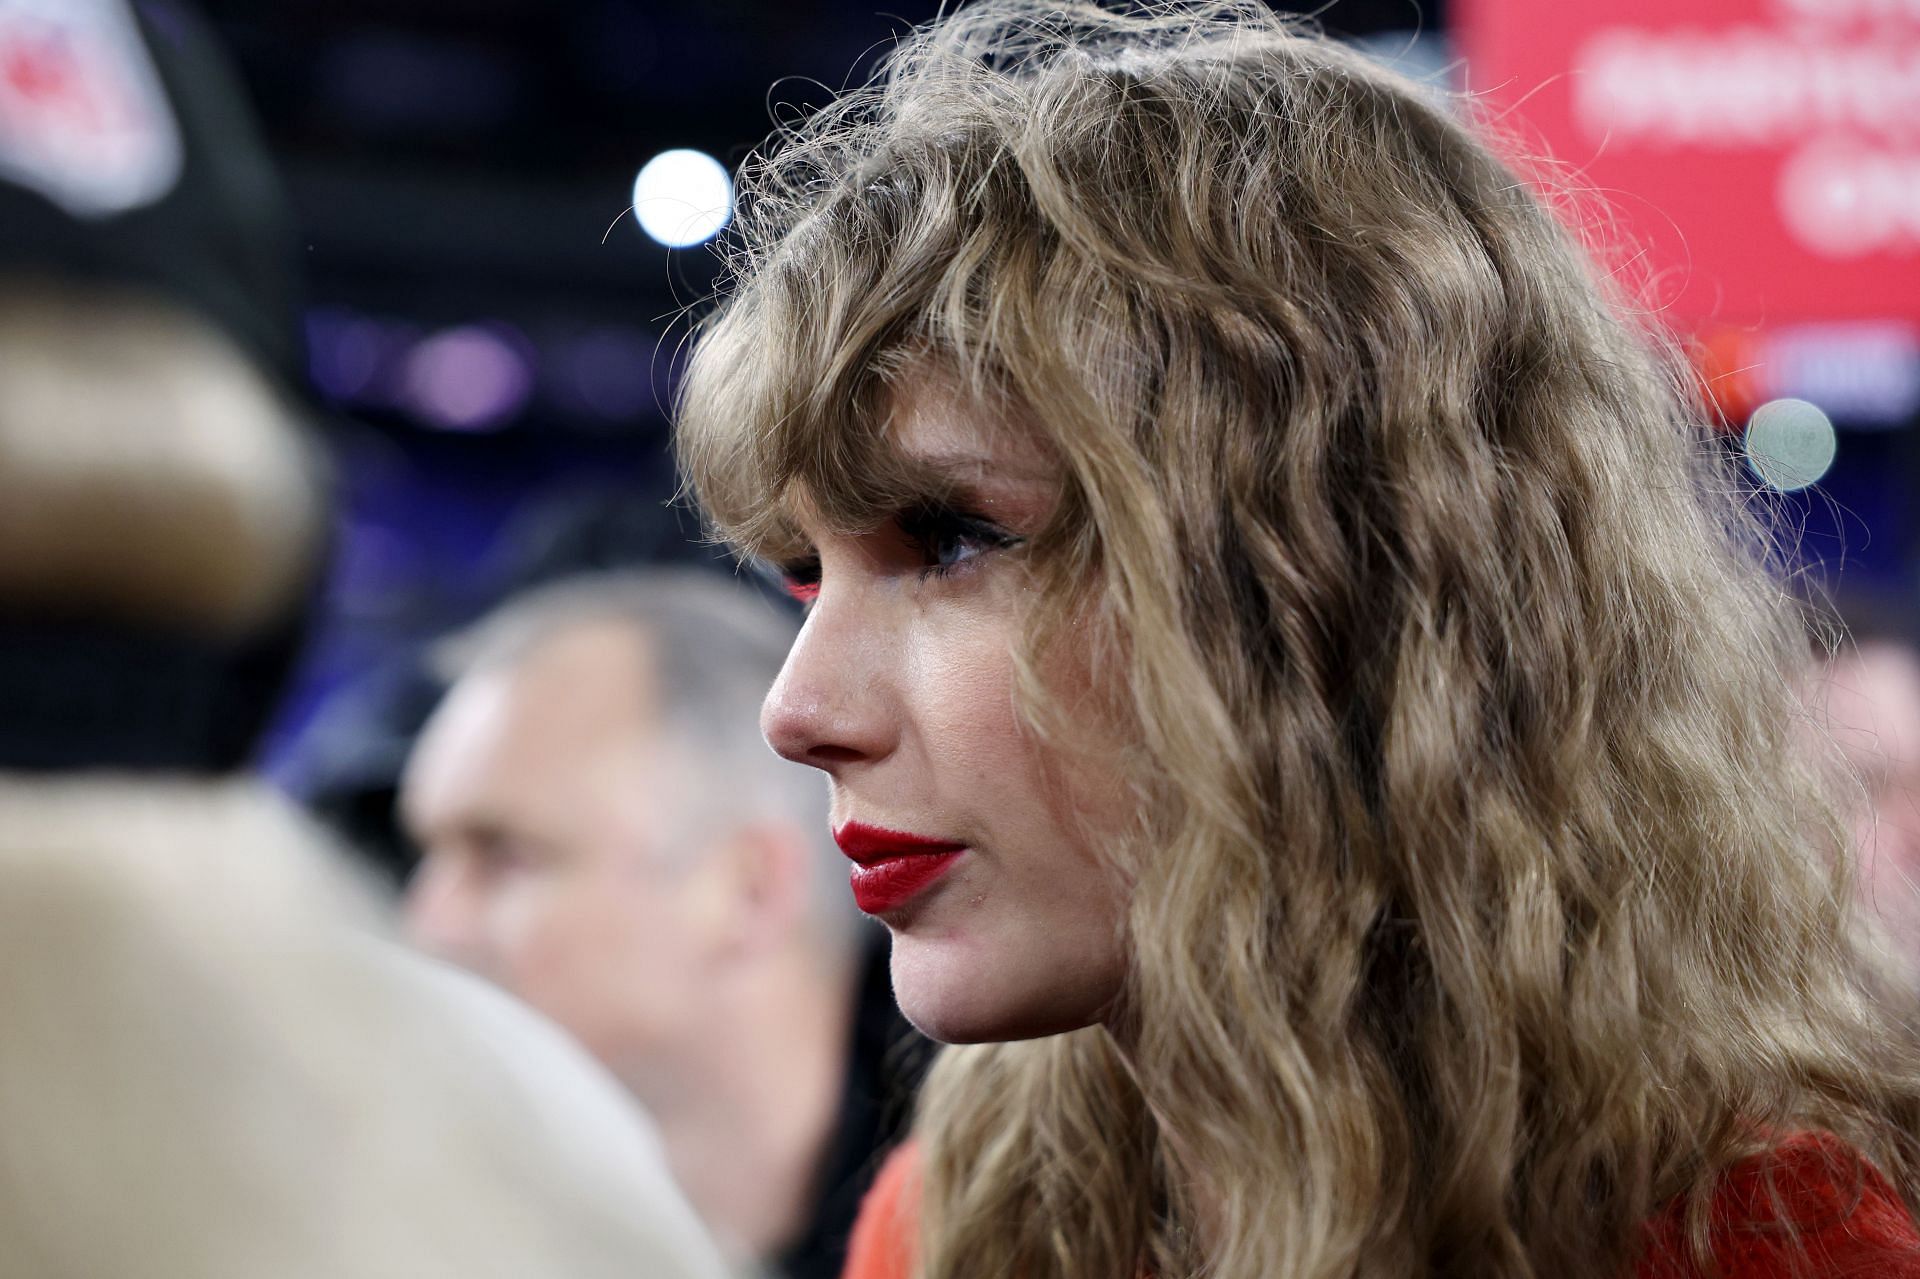 Taylor Swift brings new eyes to the Super Bowl